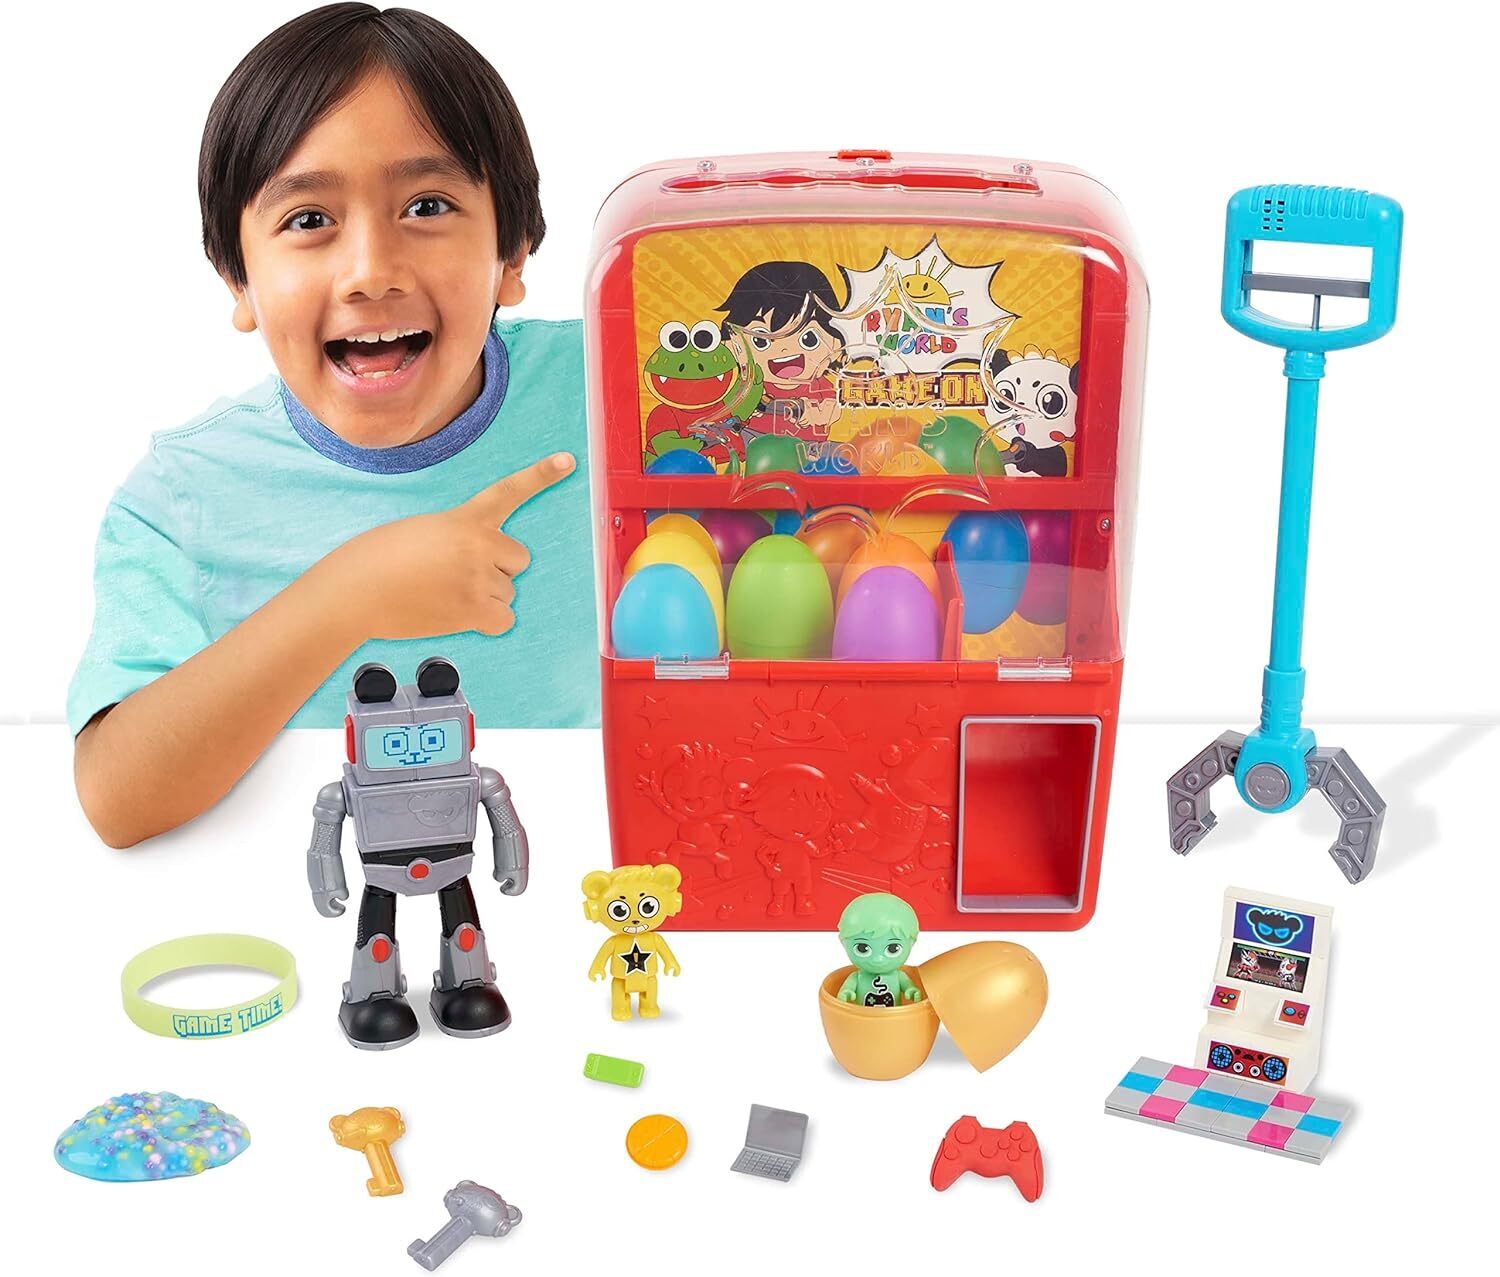 RYAN'S WORLD Mystery Claw Machine Playset and Figures, Kids Toy